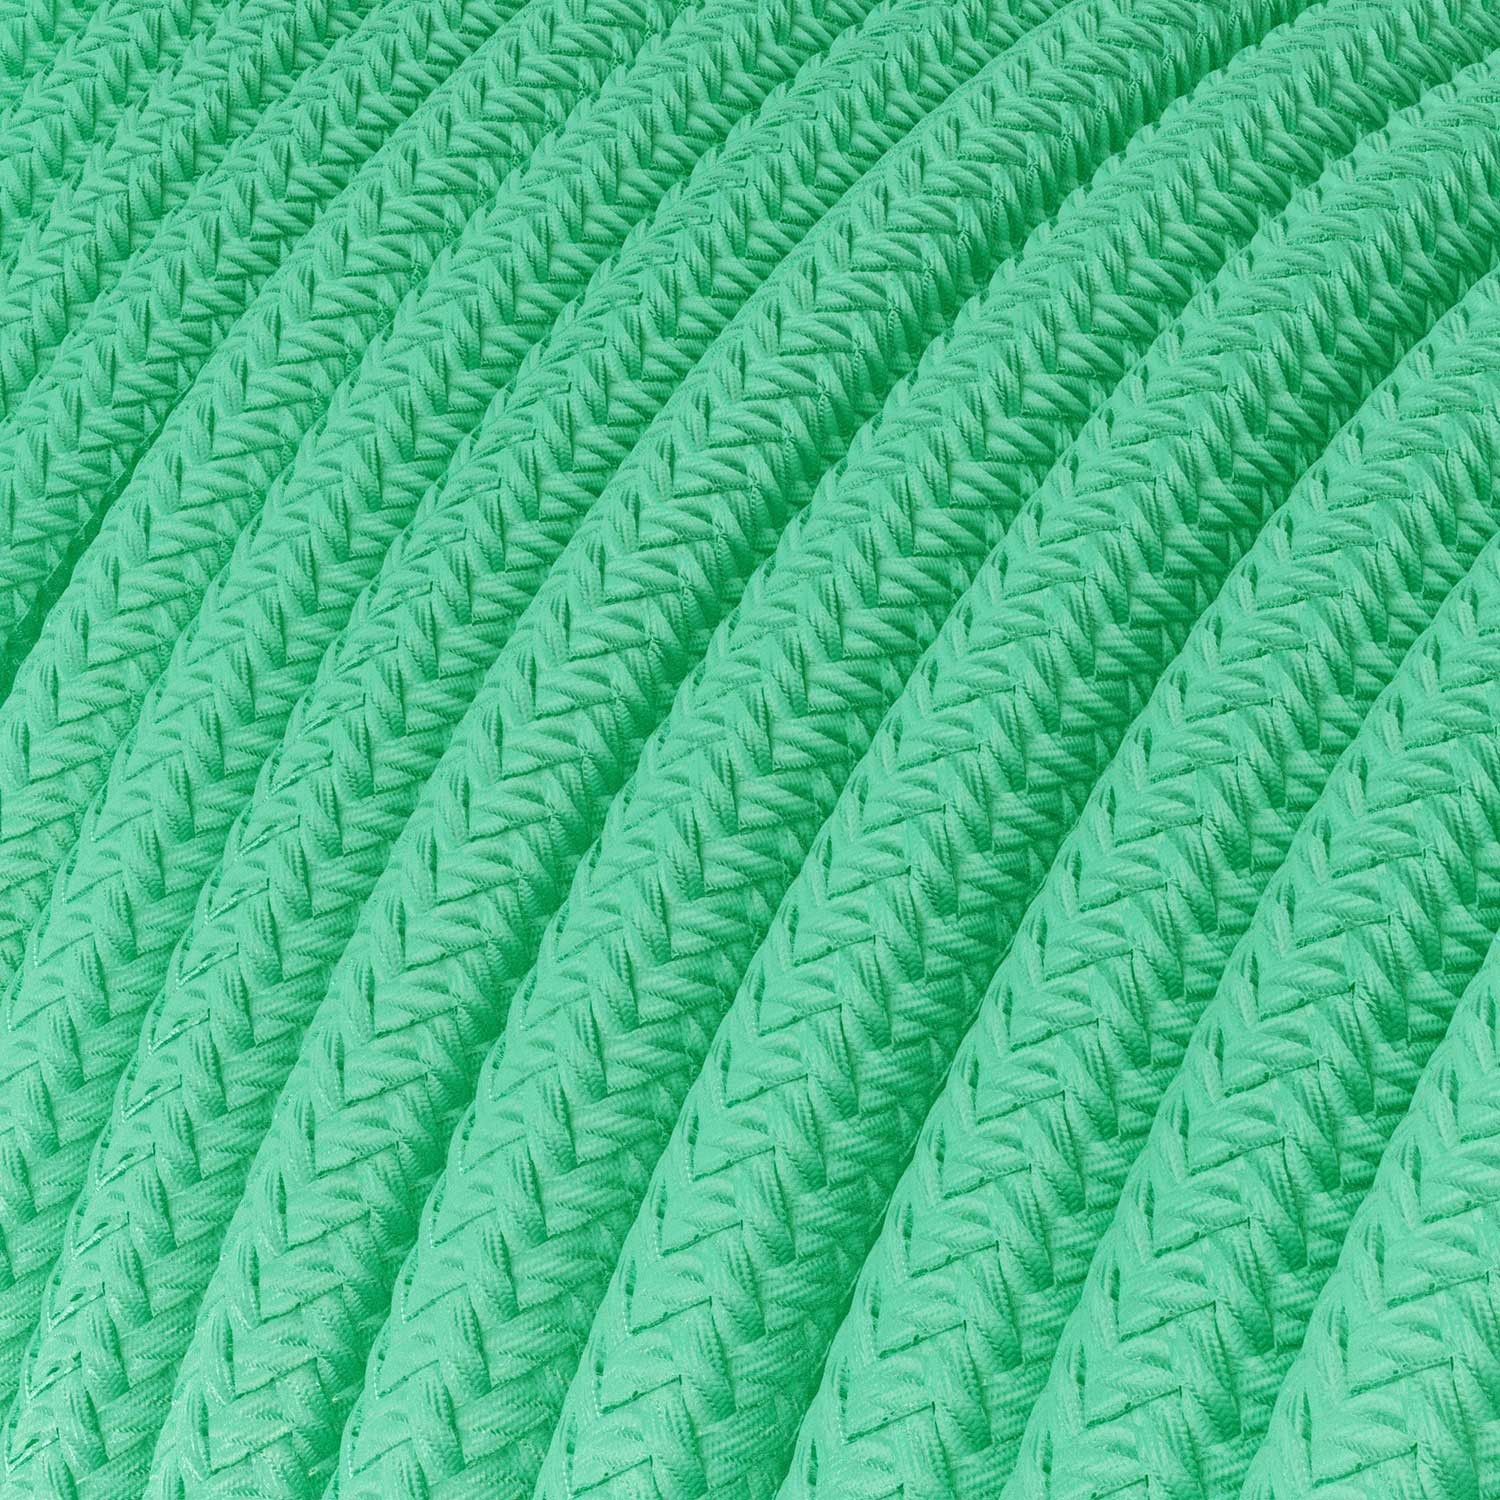 RH69 Opal Round Rayon Electrical Fabric Cloth Cord Cable